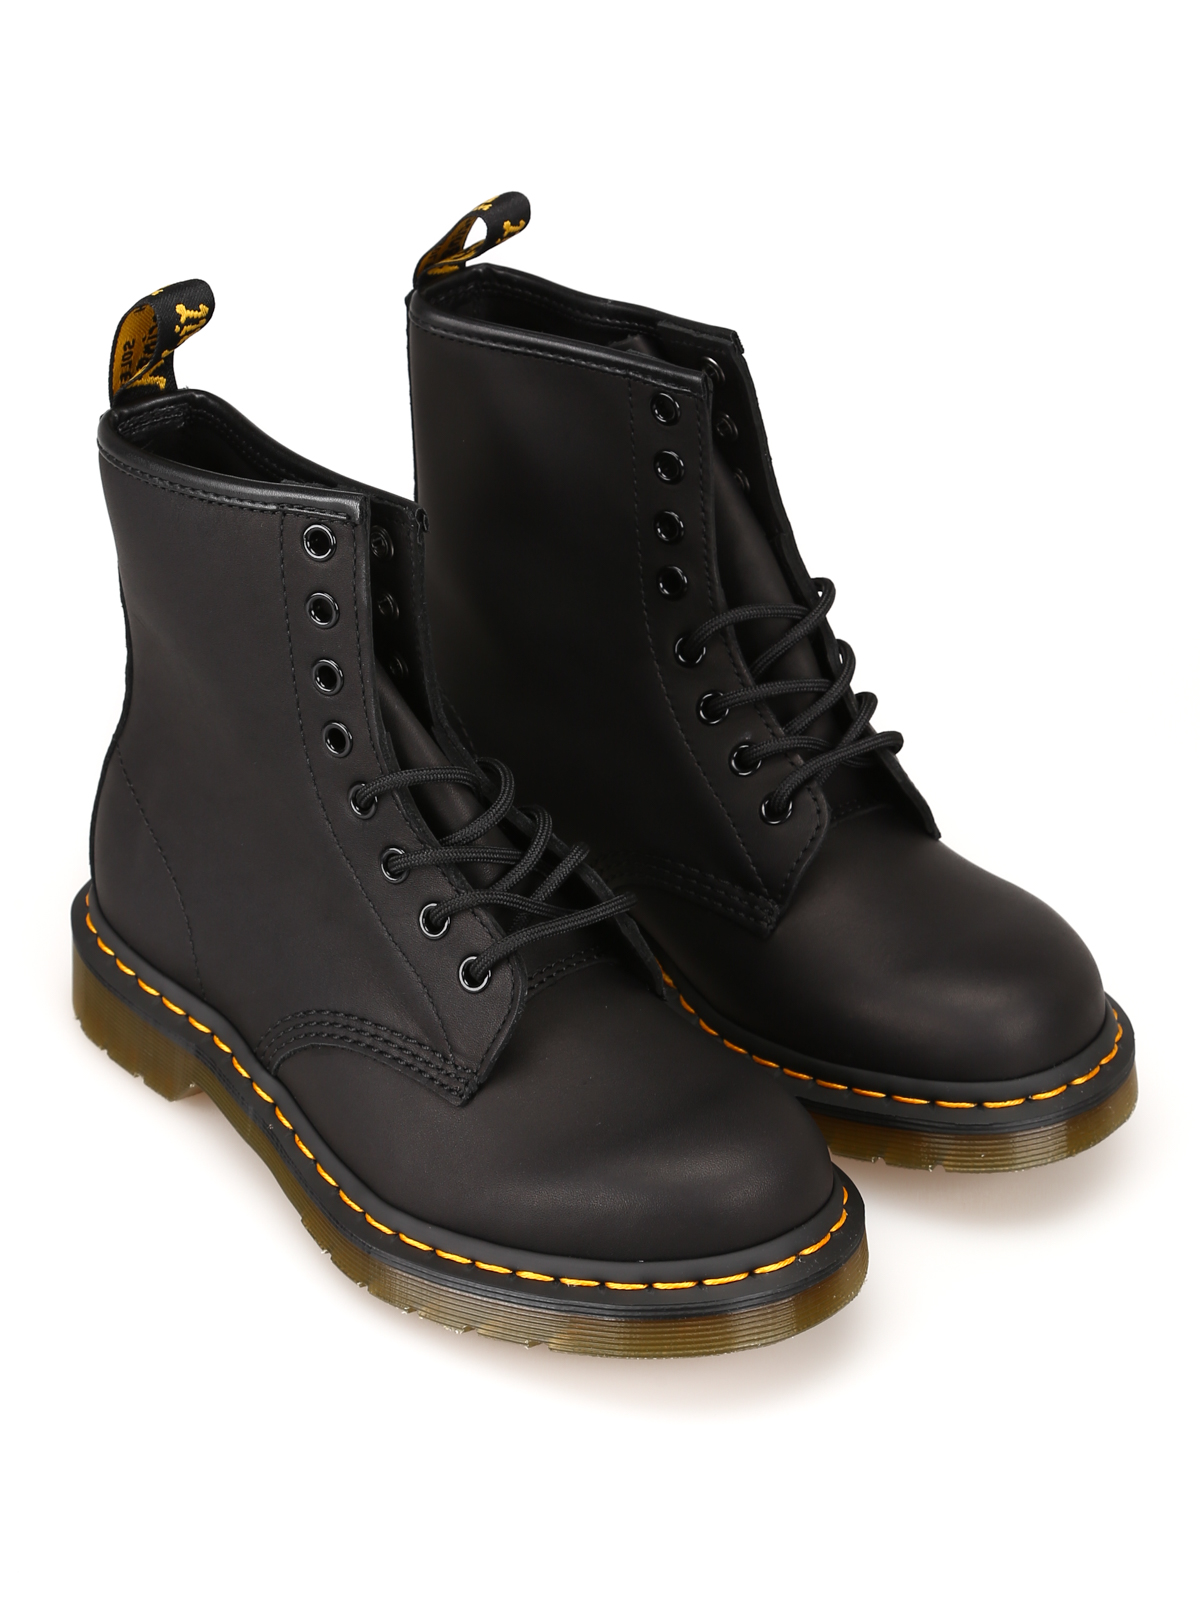 Dr. Martens - Greasy 1460 black leather combat boots - ankle boots ...